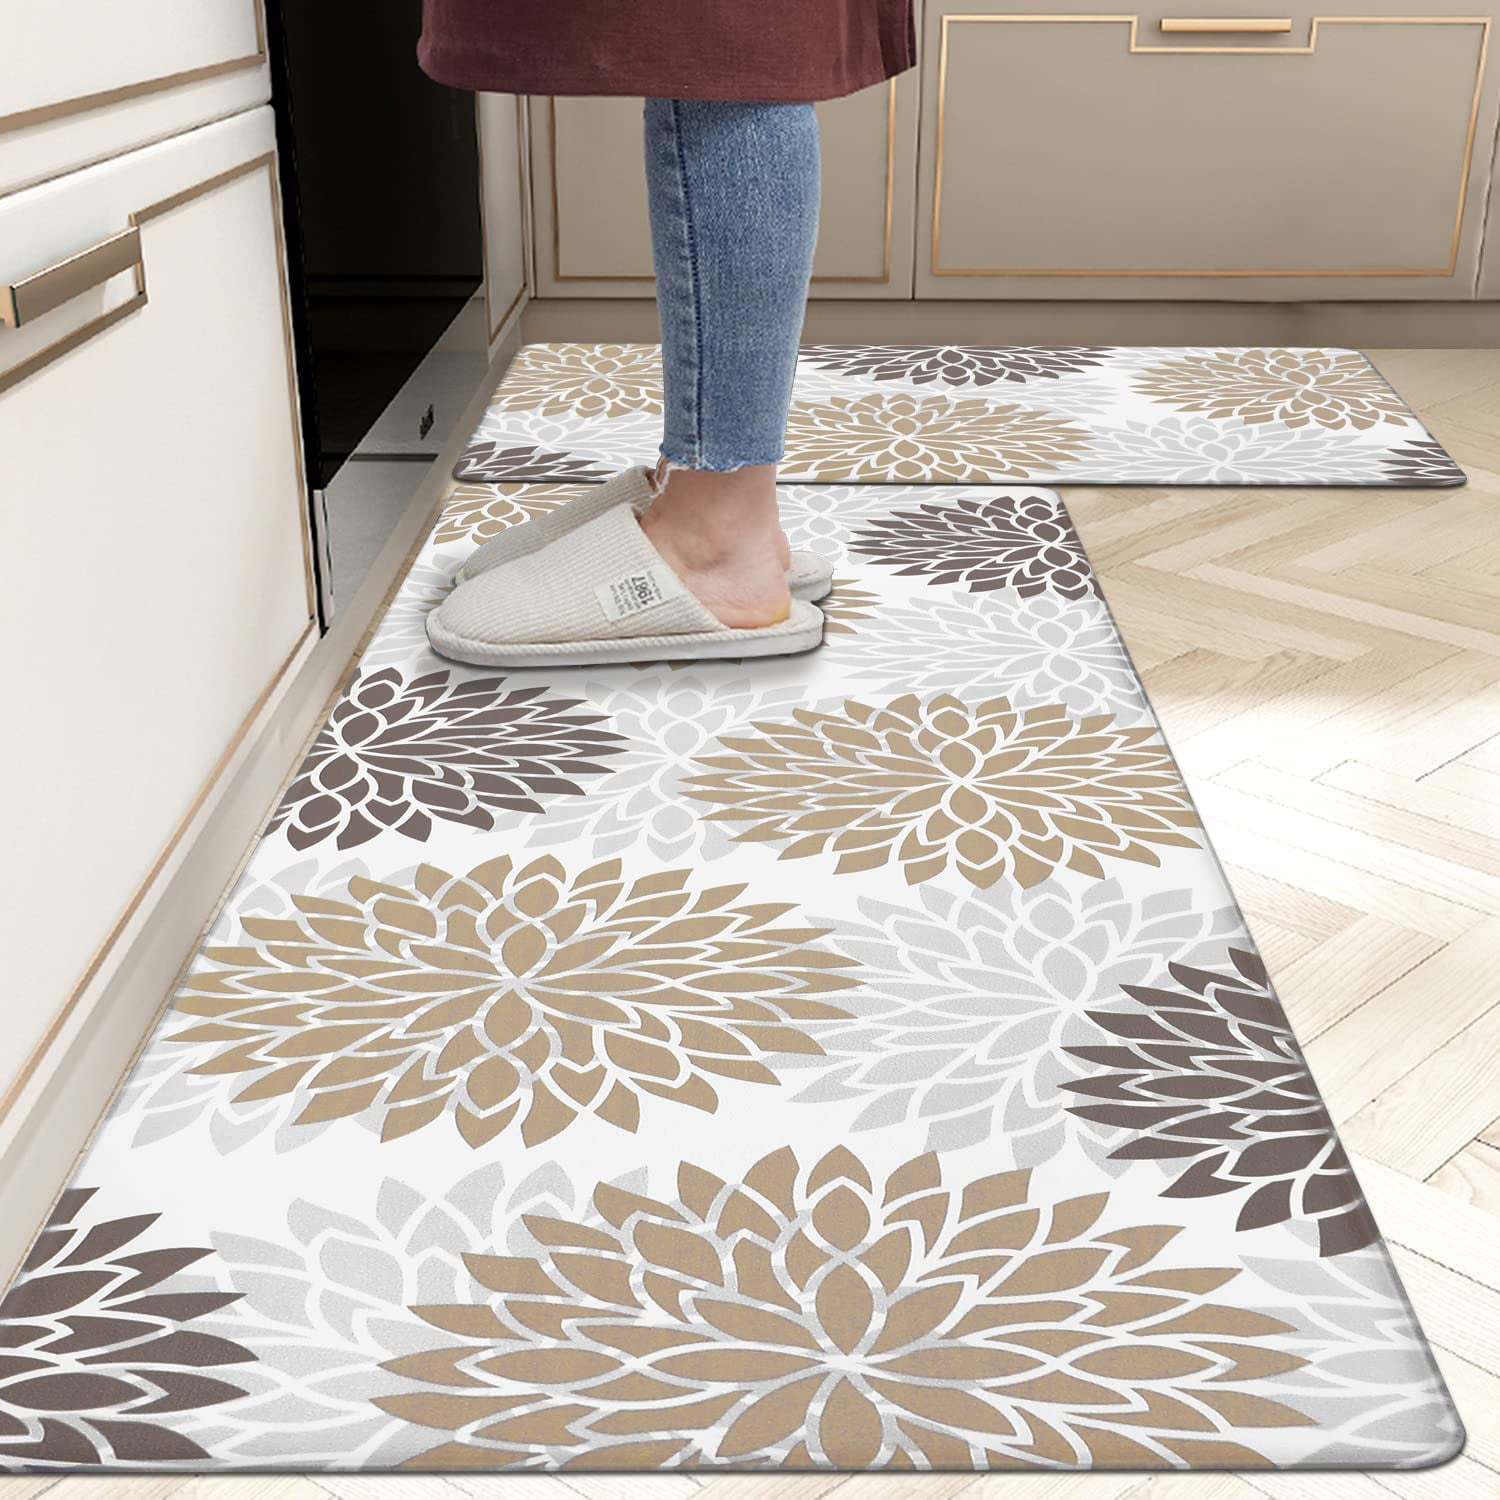  Oakeep Kitchen Mat Anti Fatigue Cushioned Mats for Floor Runner  Rug Padded Kitchen Mats for Standing, 17x59, Grey: Home & Kitchen